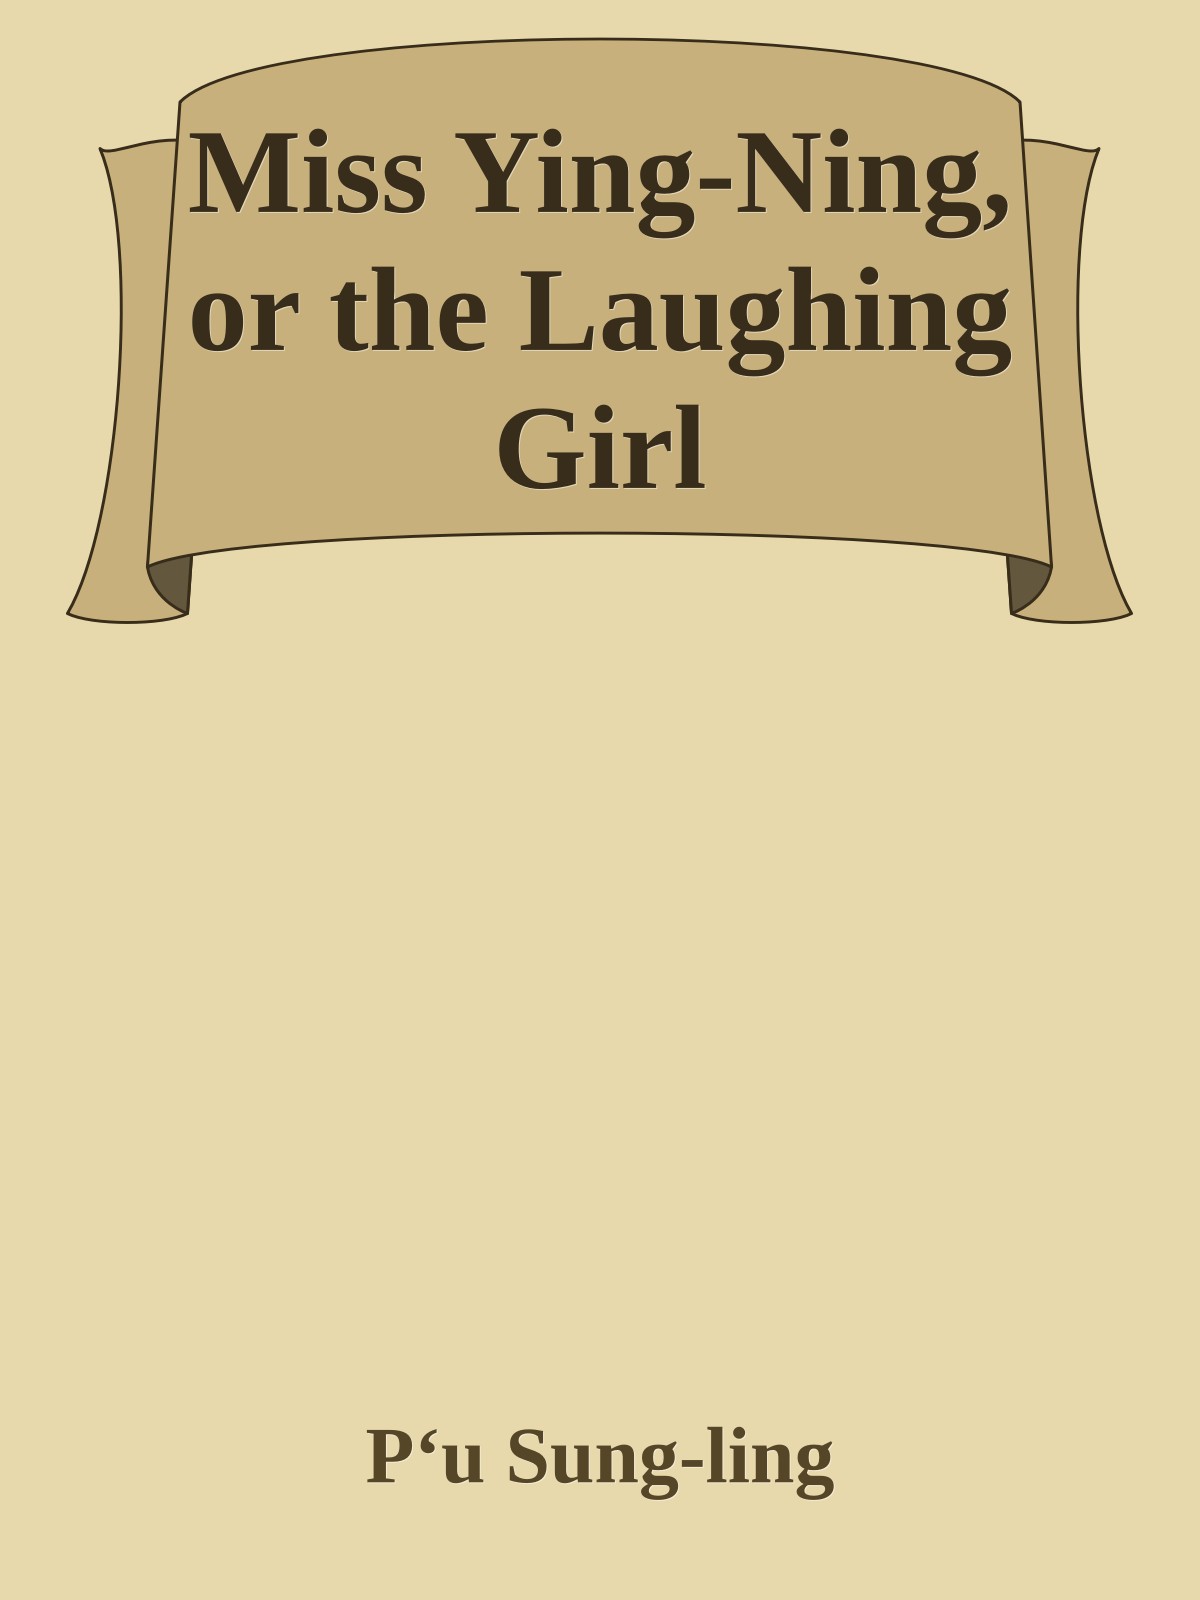 Miss Ying-Ning, or the Laughing Girl